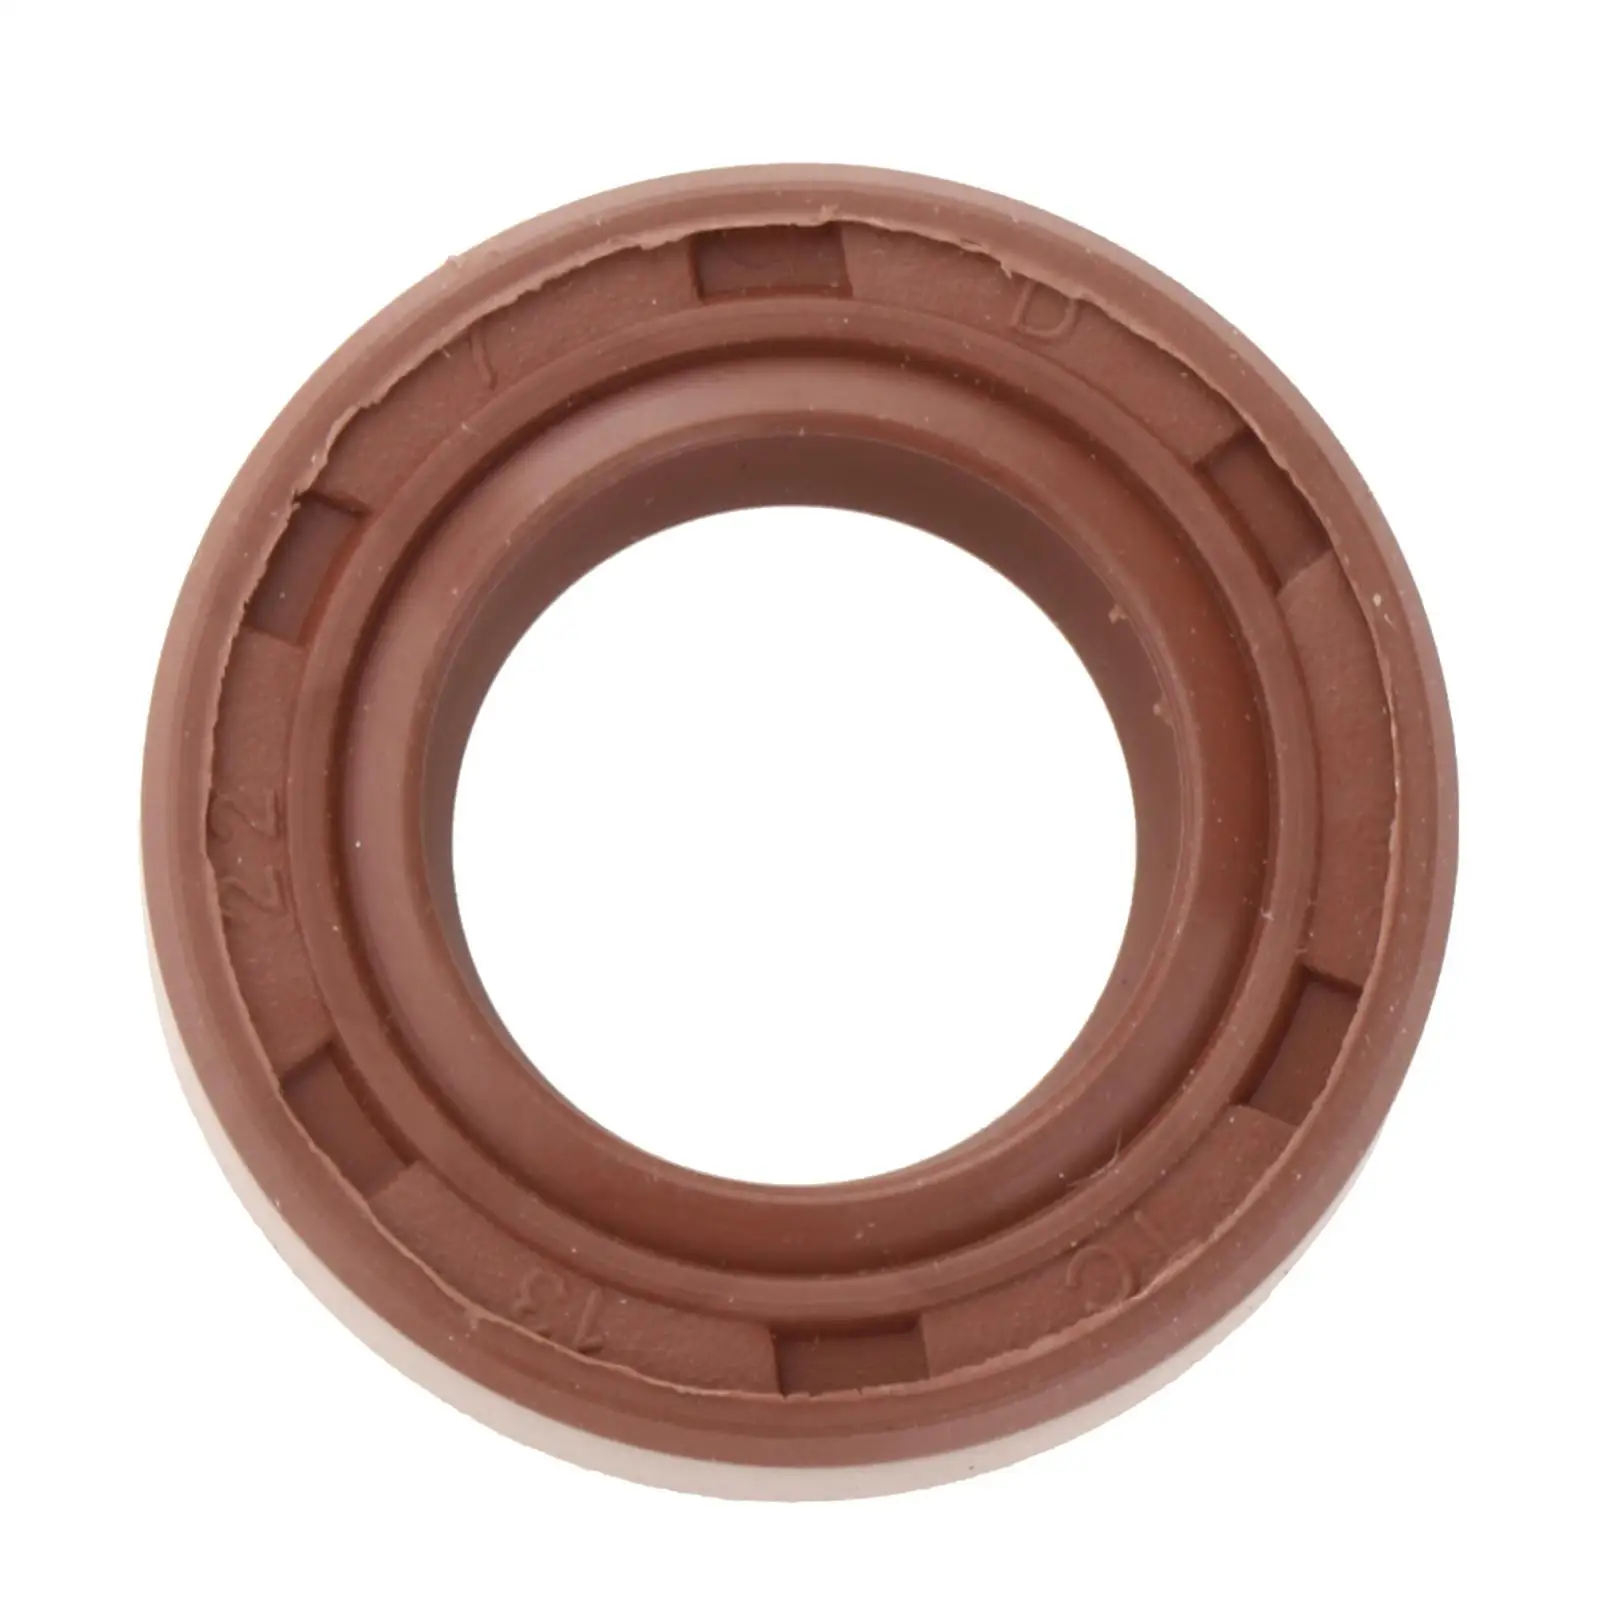 93101-13M12 933-0600423-00 Replaces 9310113M12 931011380000 933060042300 Oil Seal for Yamaha 3HP 4HP 5HP Outboard Motor